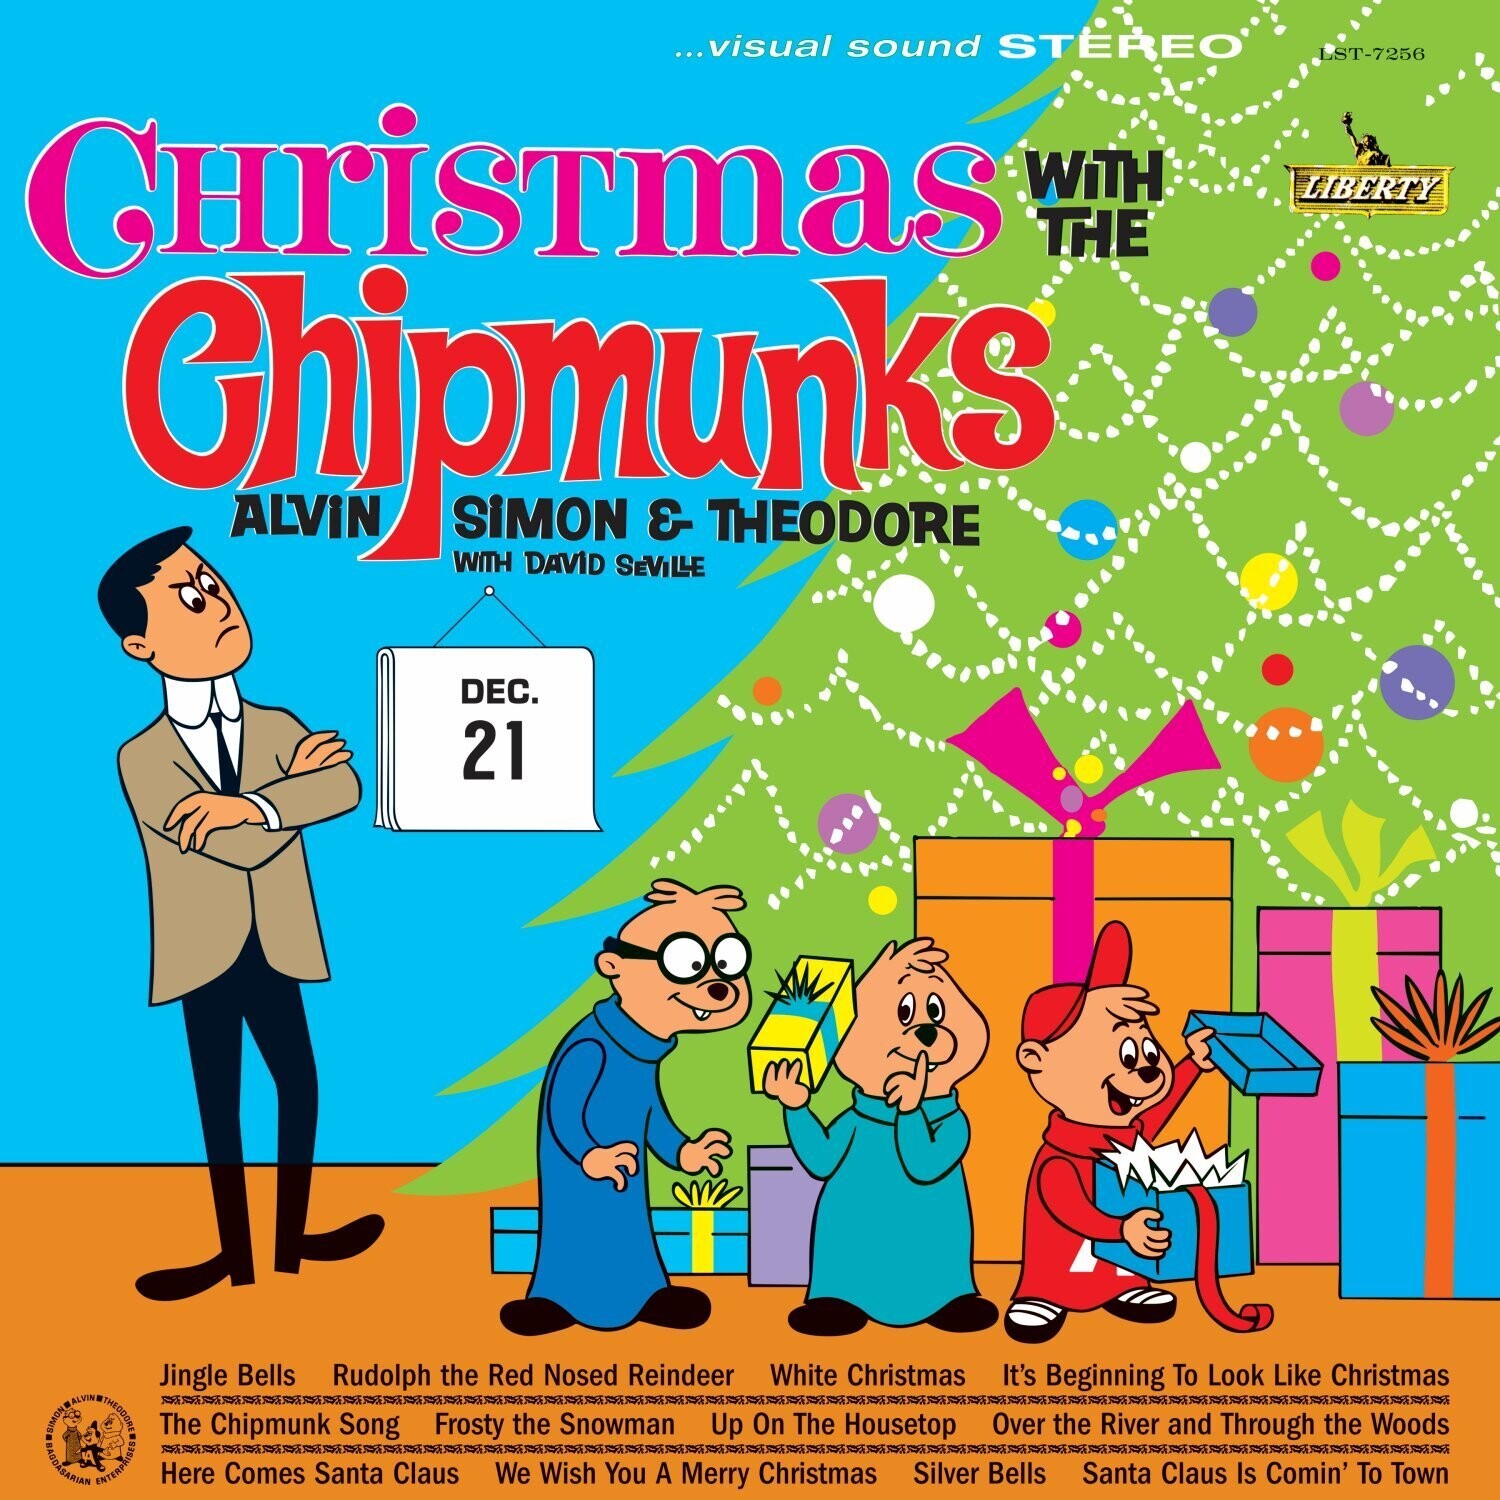 The Chipmunks "Christmas With..." VG+ 1962/re.1974